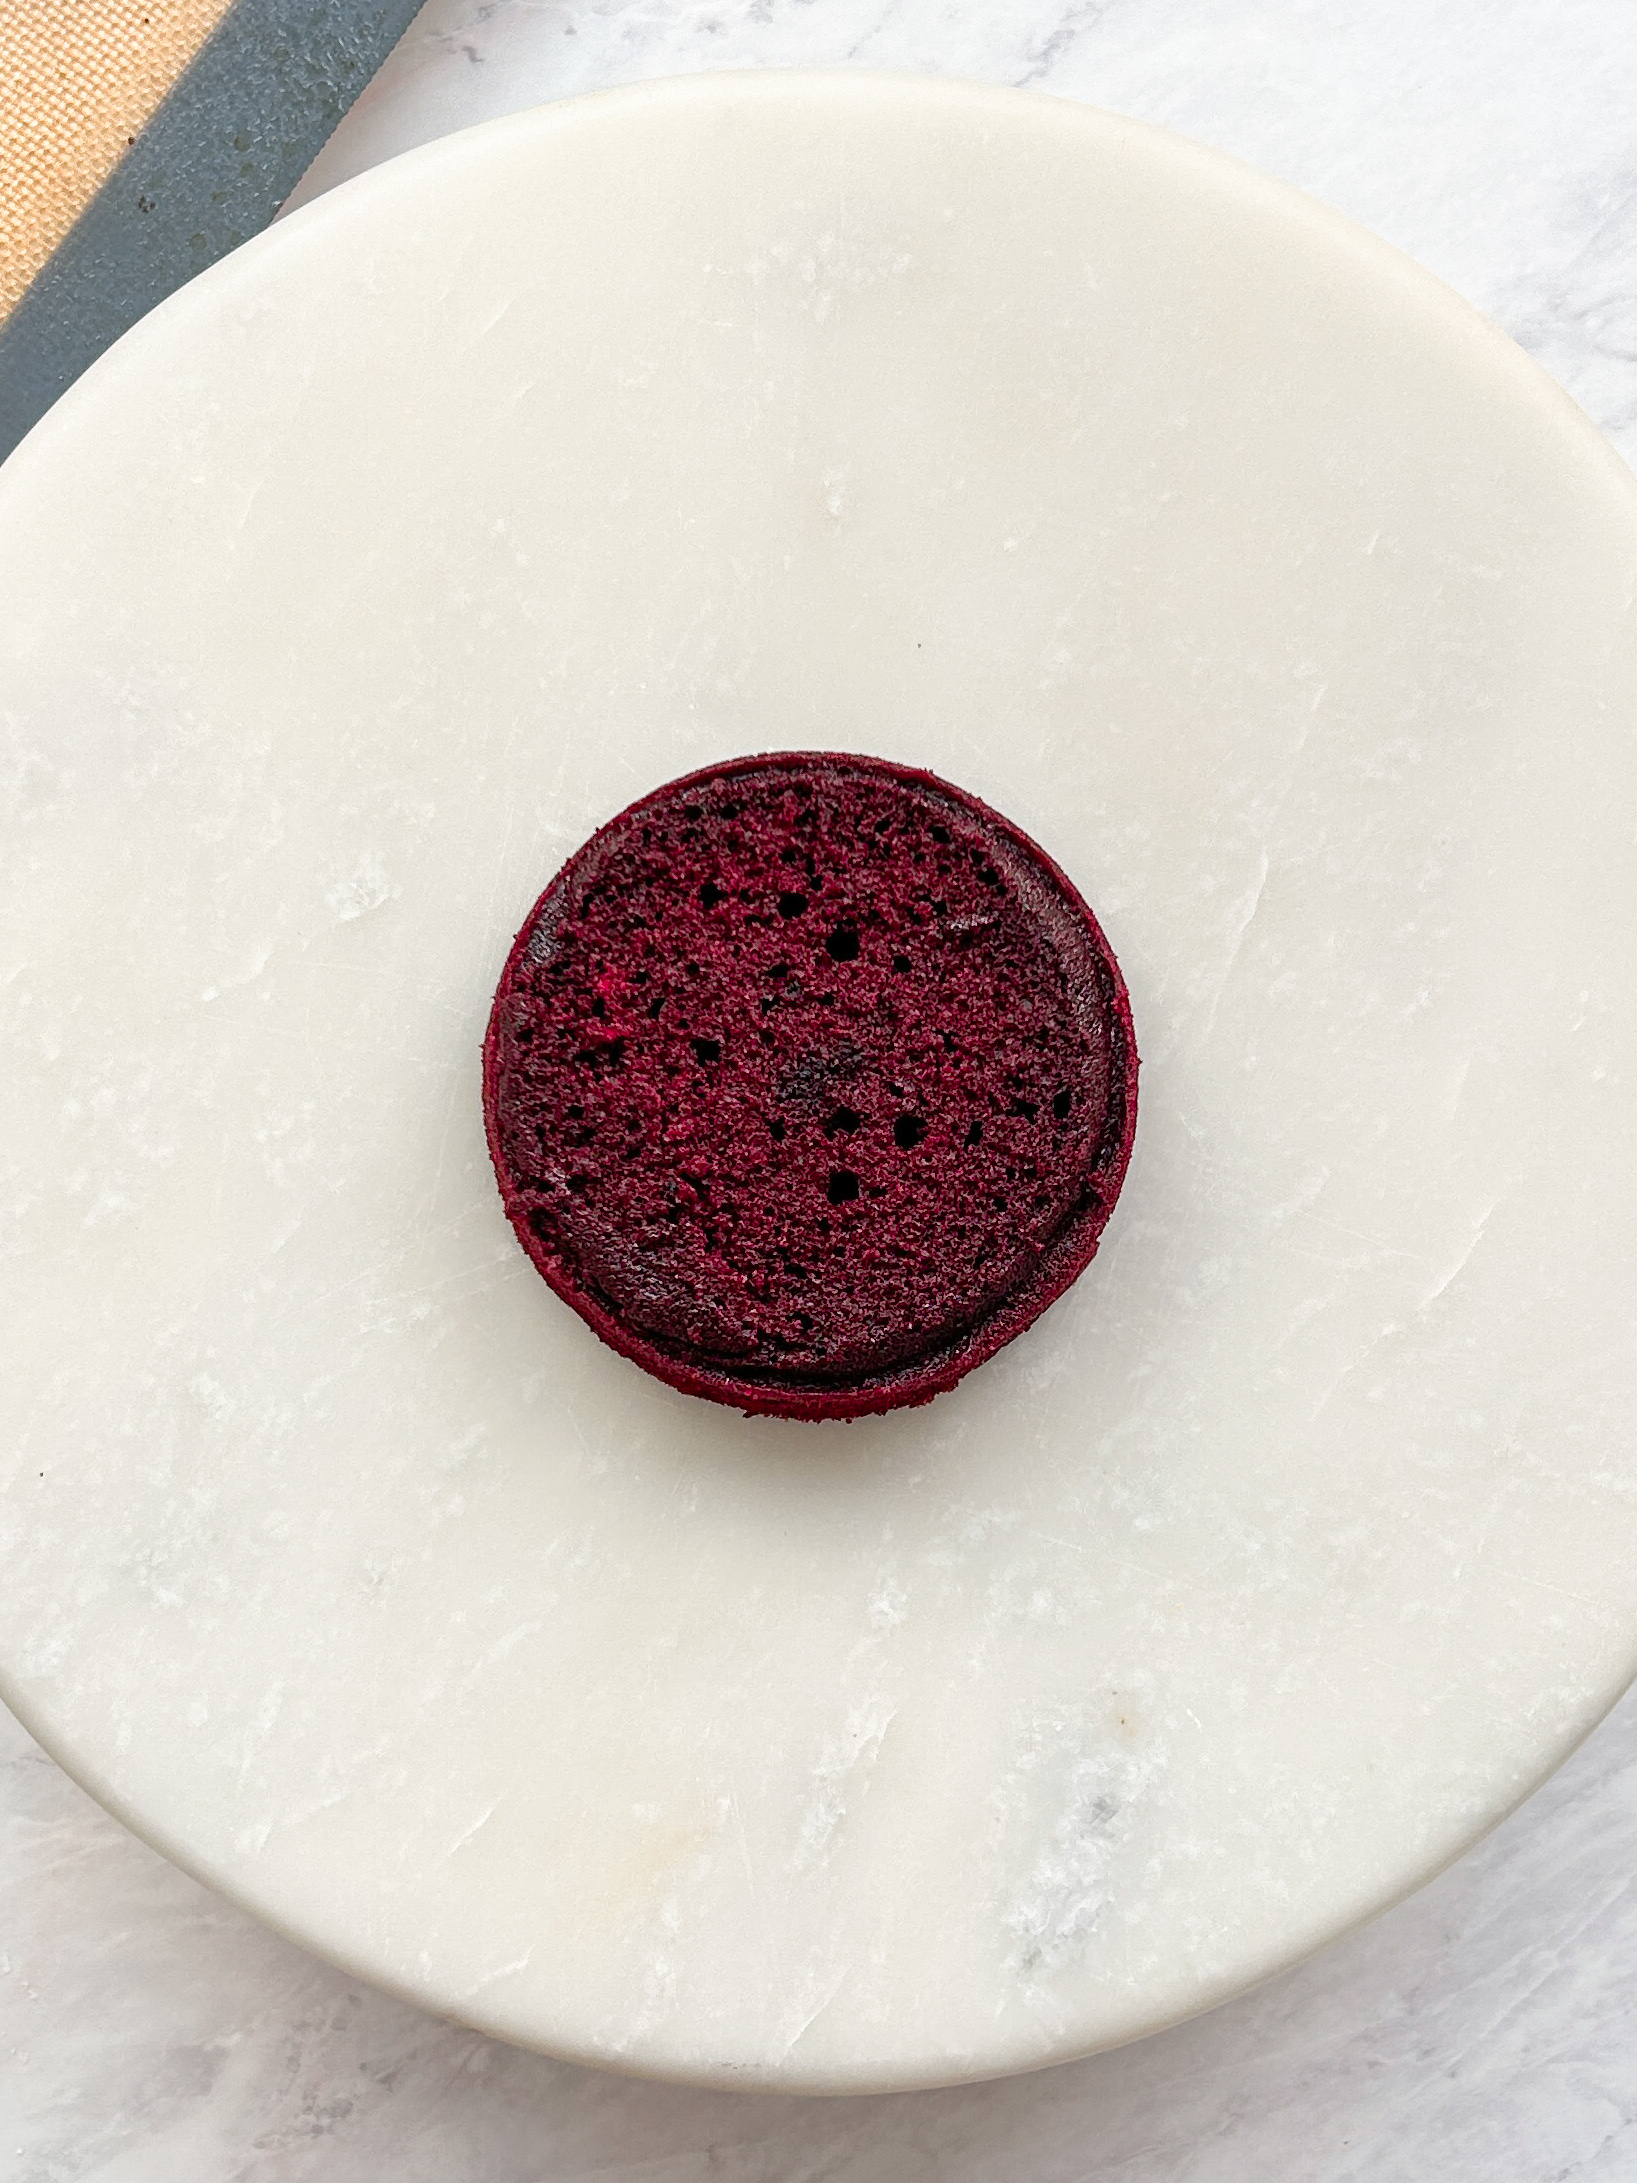 small red velvet cake on a marble serving board